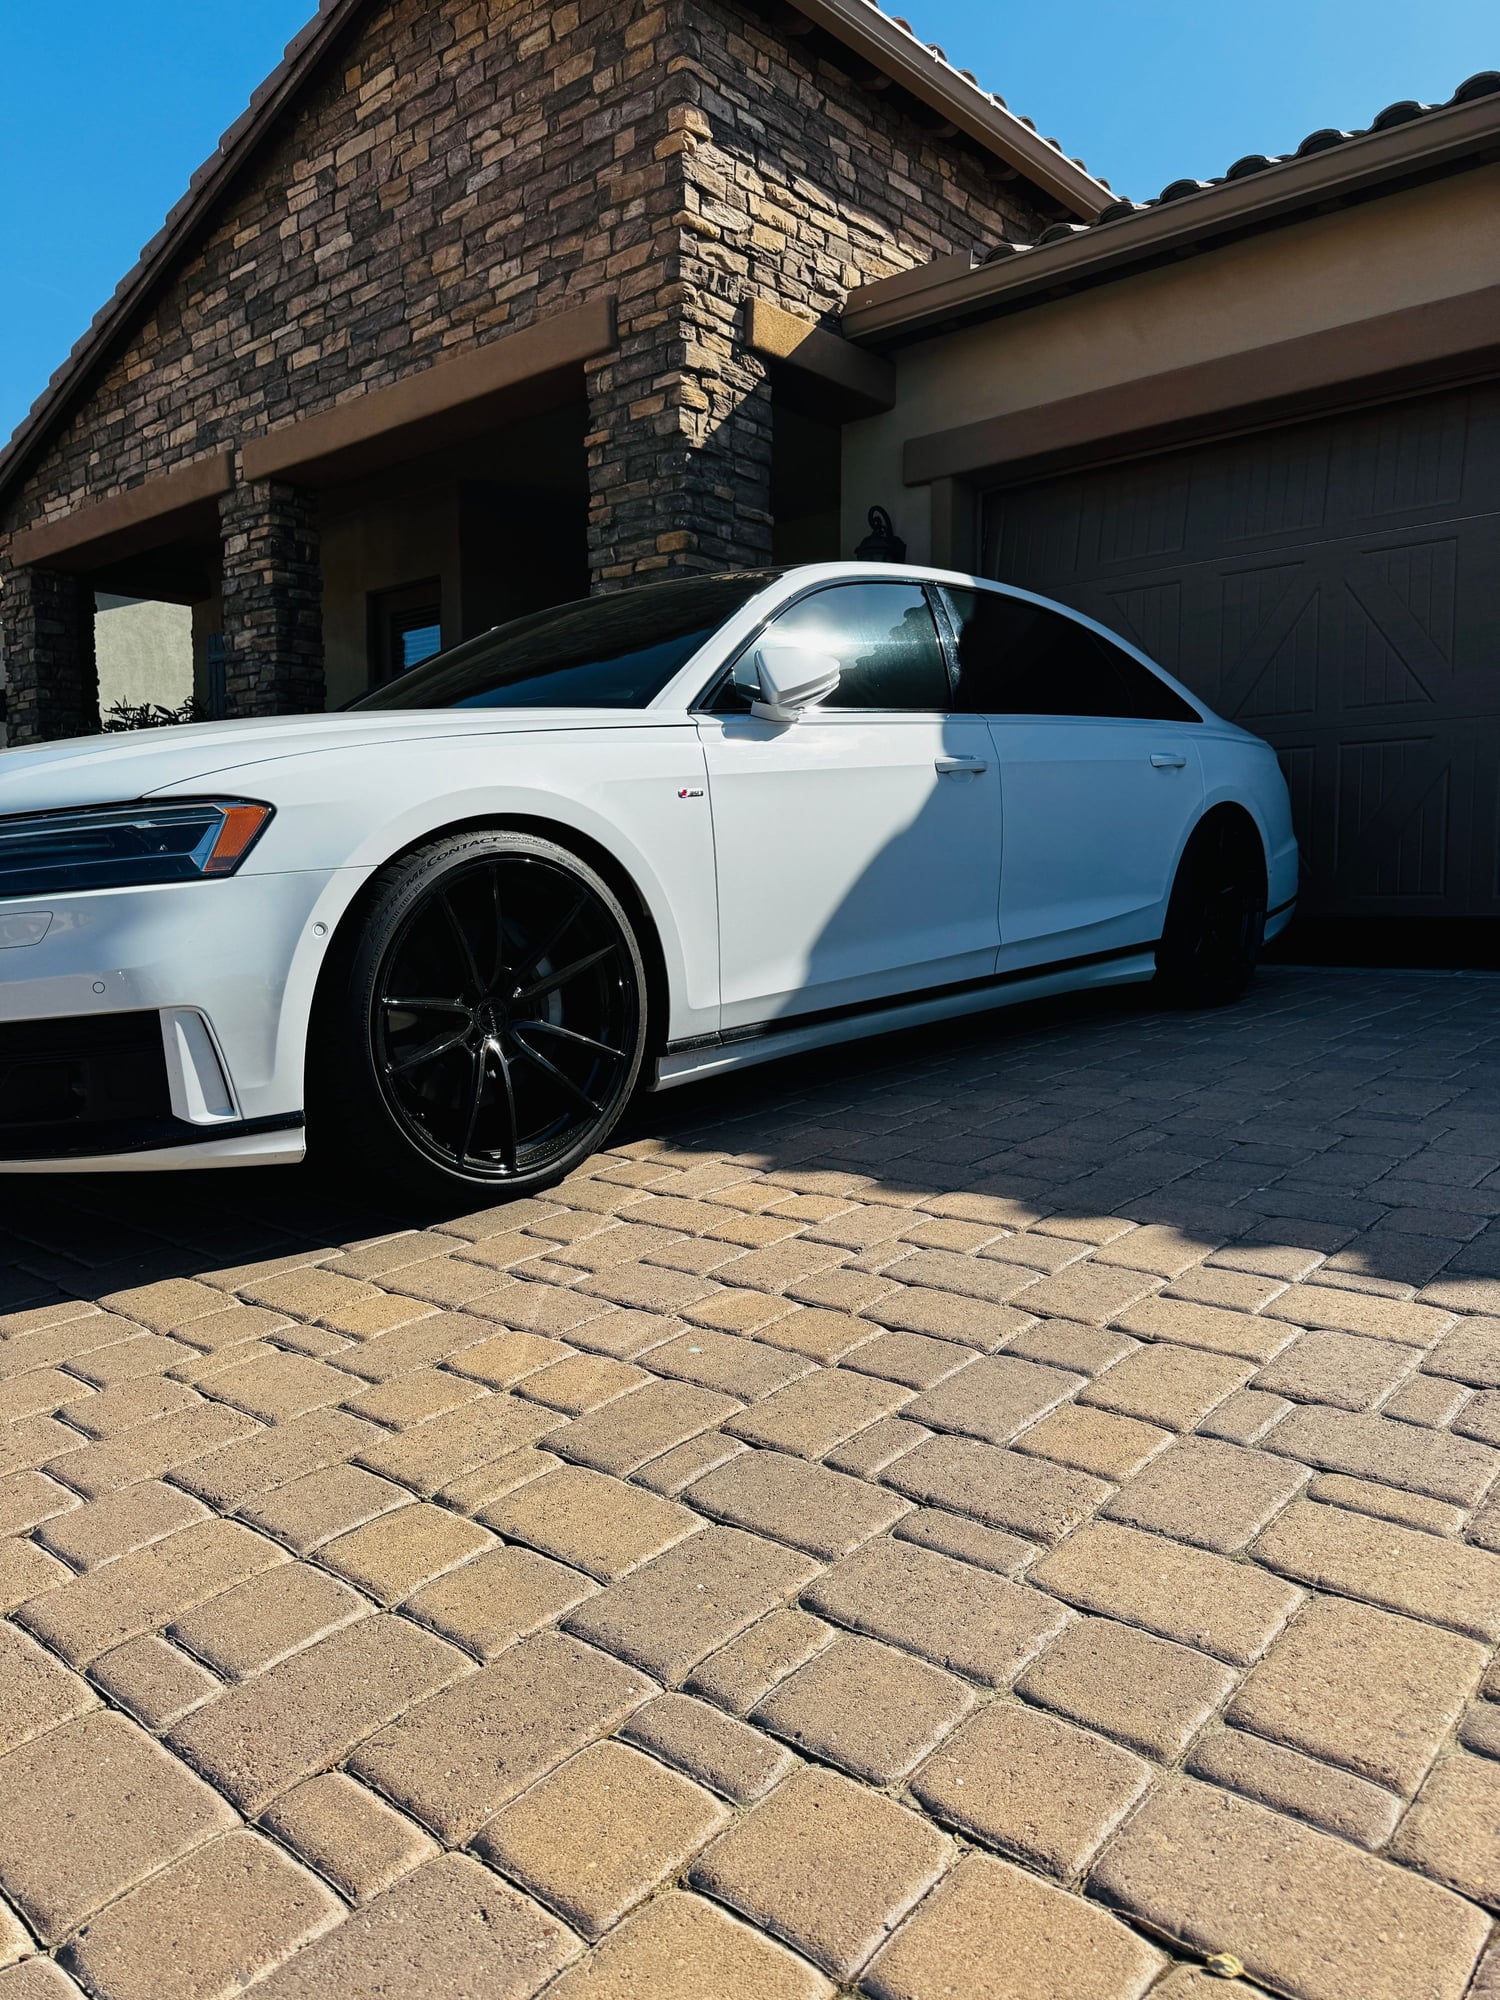 Wheels and Tires/Axles - 22” Wheels, Tires, Lowering Links And Lugs LIKE NEW! - Used - All Years Audi All Models - All Years Mercedes-Benz All Models - Scottsdale, AZ 85266, United States